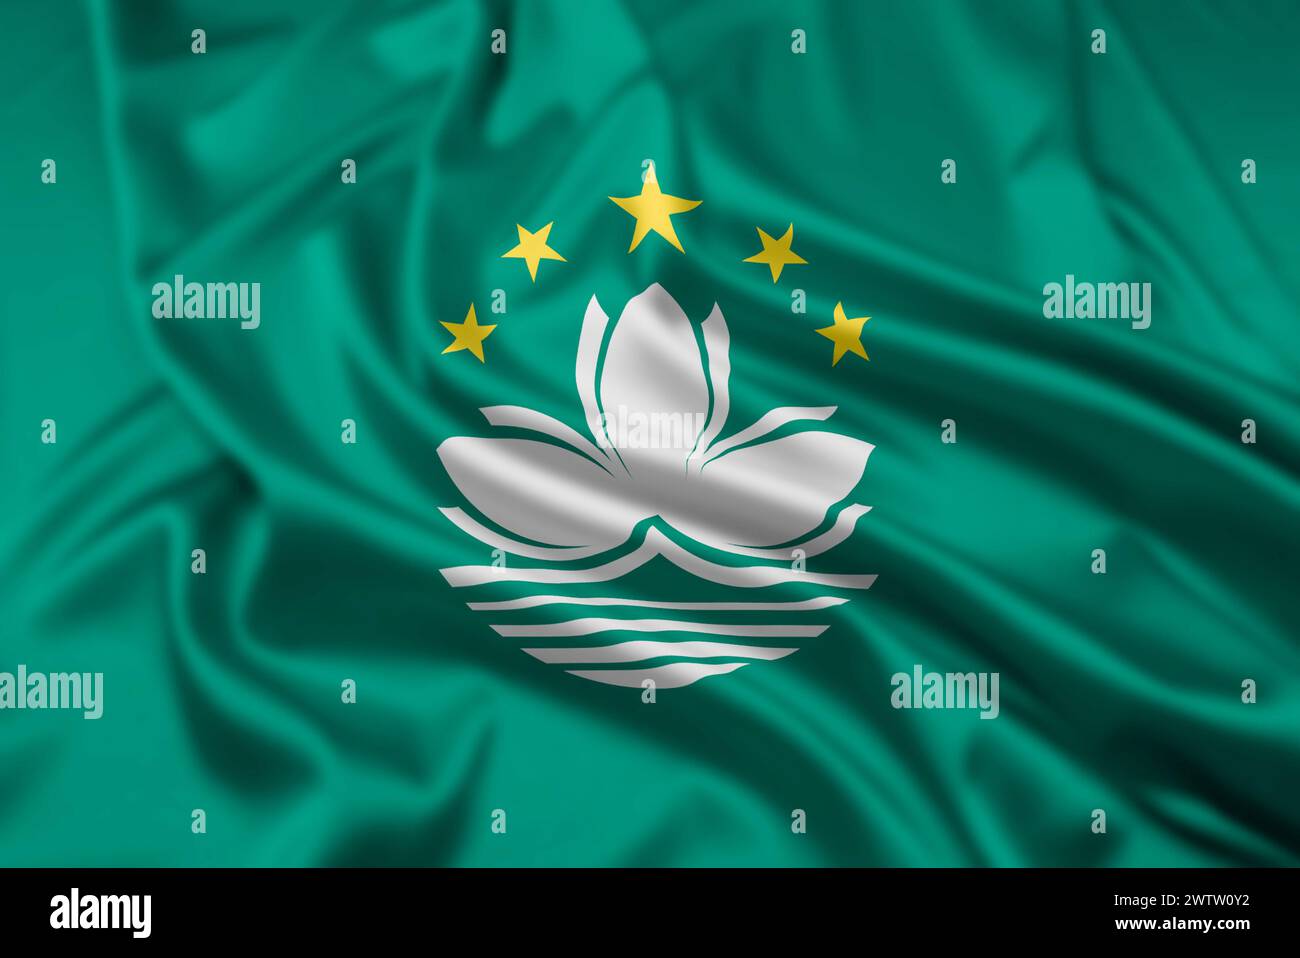 The Flag of The Macau Special Administrative Region of The People's Republic of China Stock Photo